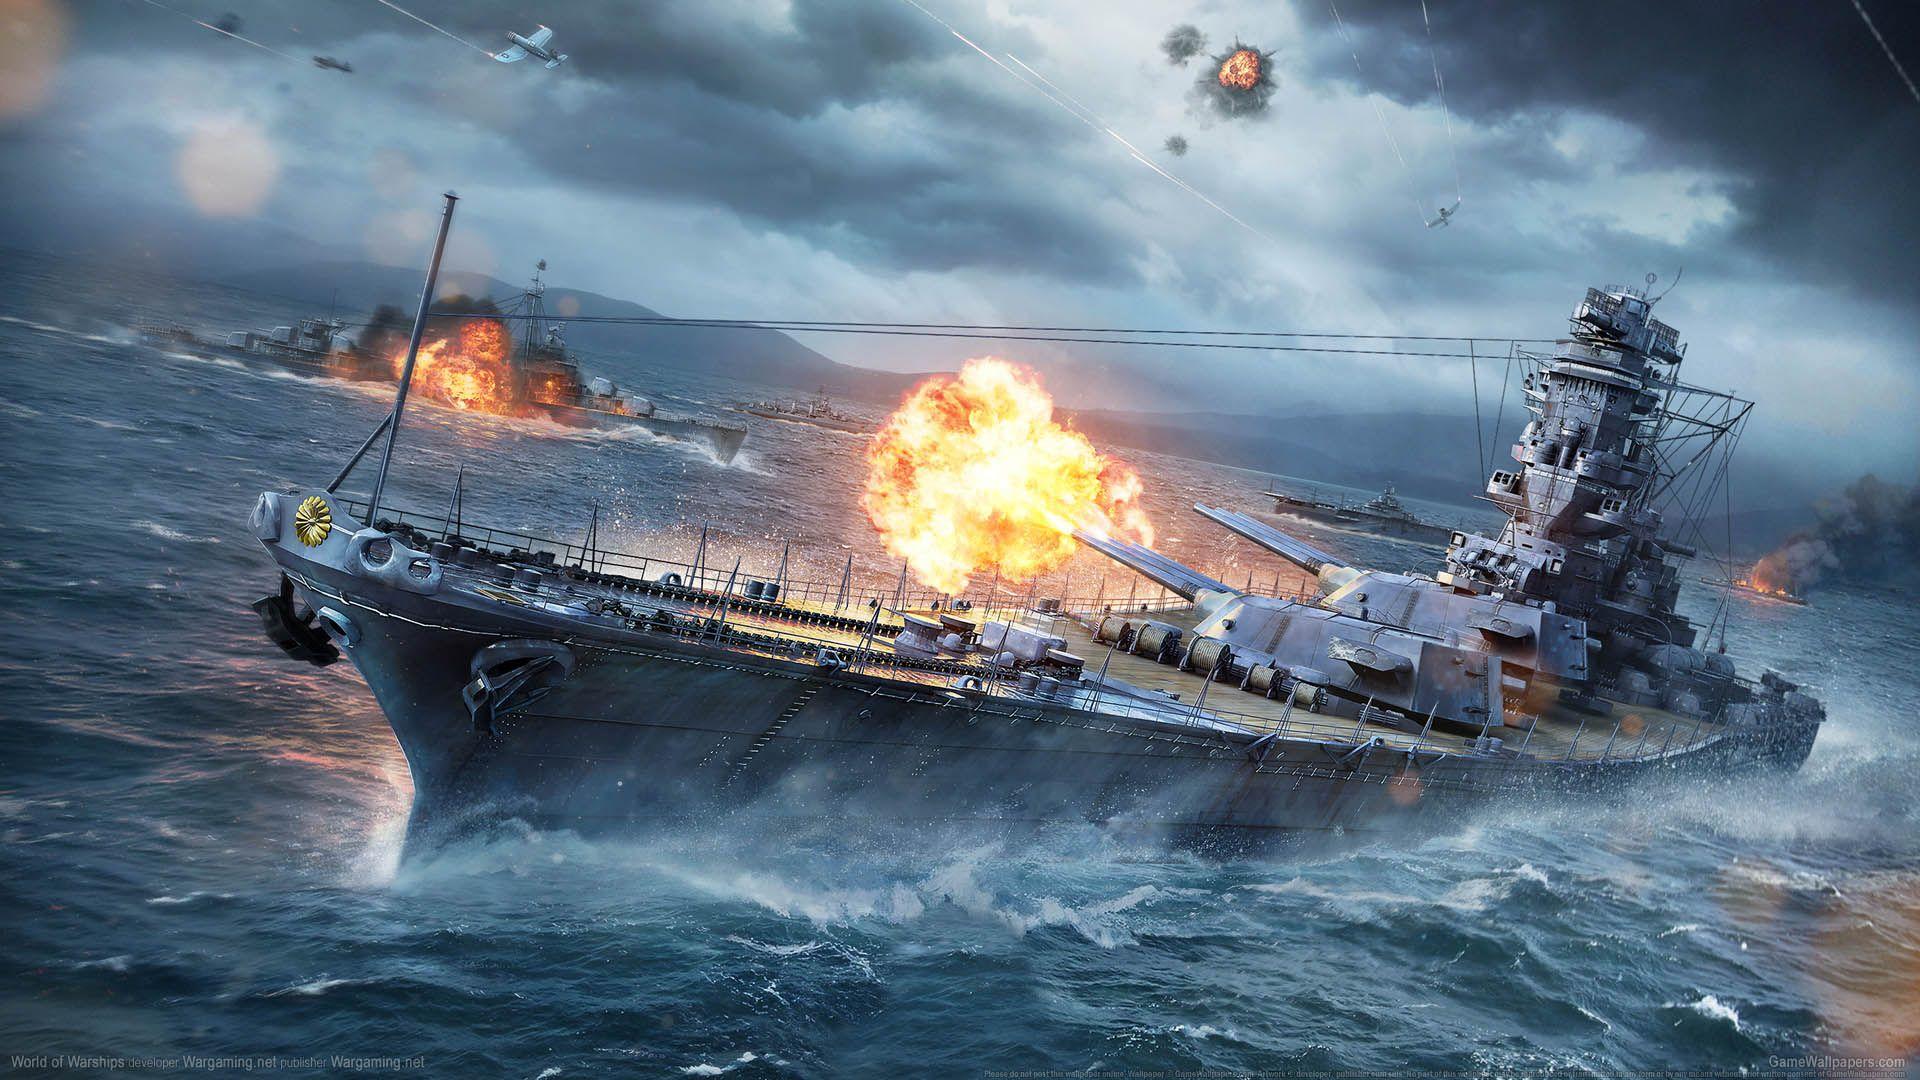 World of Warships Offering 75th Anniversary Pearl Harbor Ship Flag